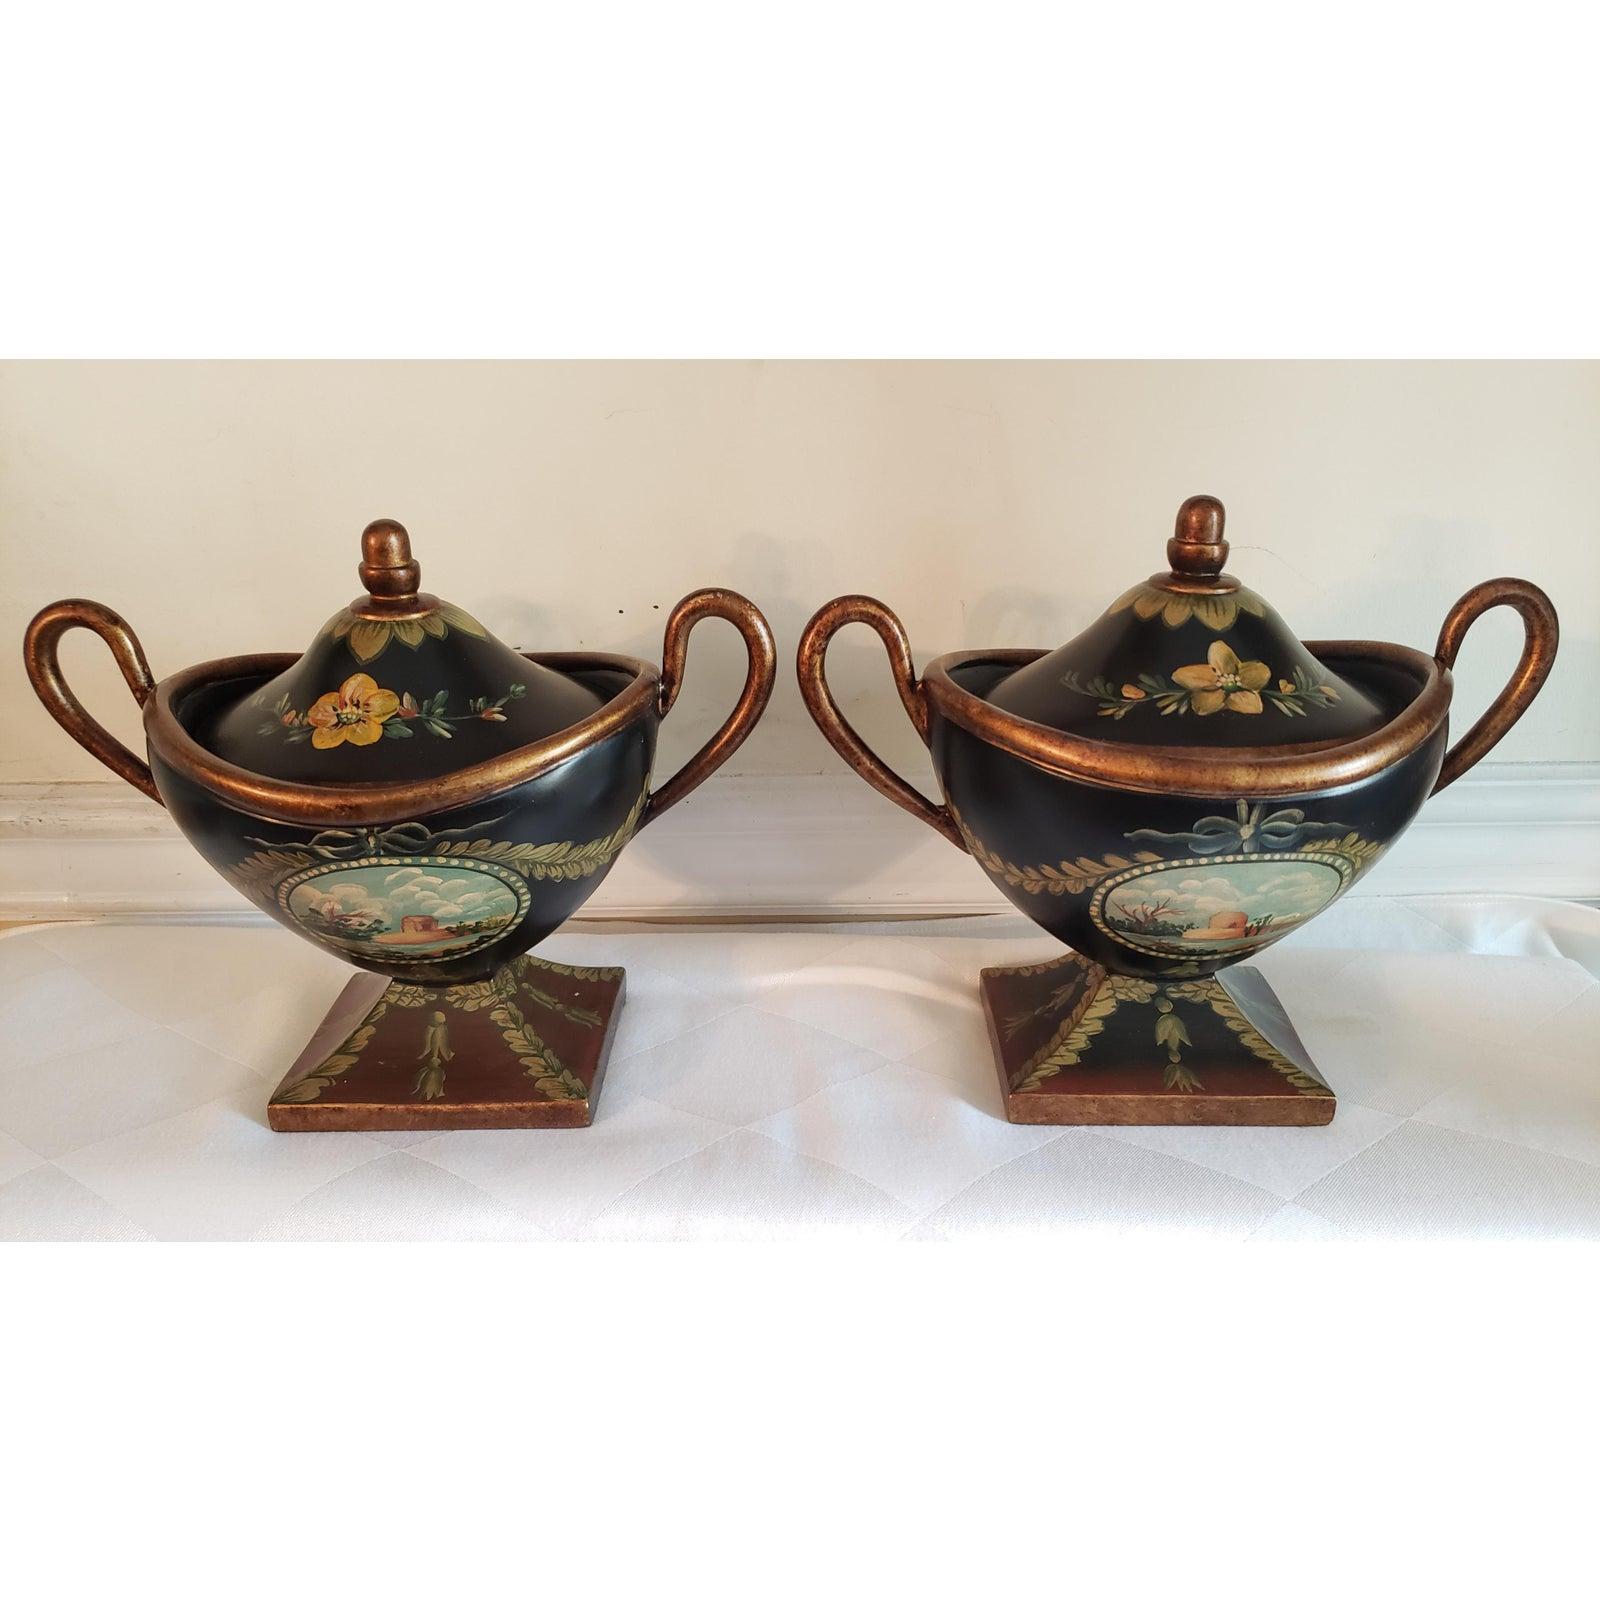 Vintage 1950s Hand Painted Decorative Ceramic Urns, a Pair For Sale 5